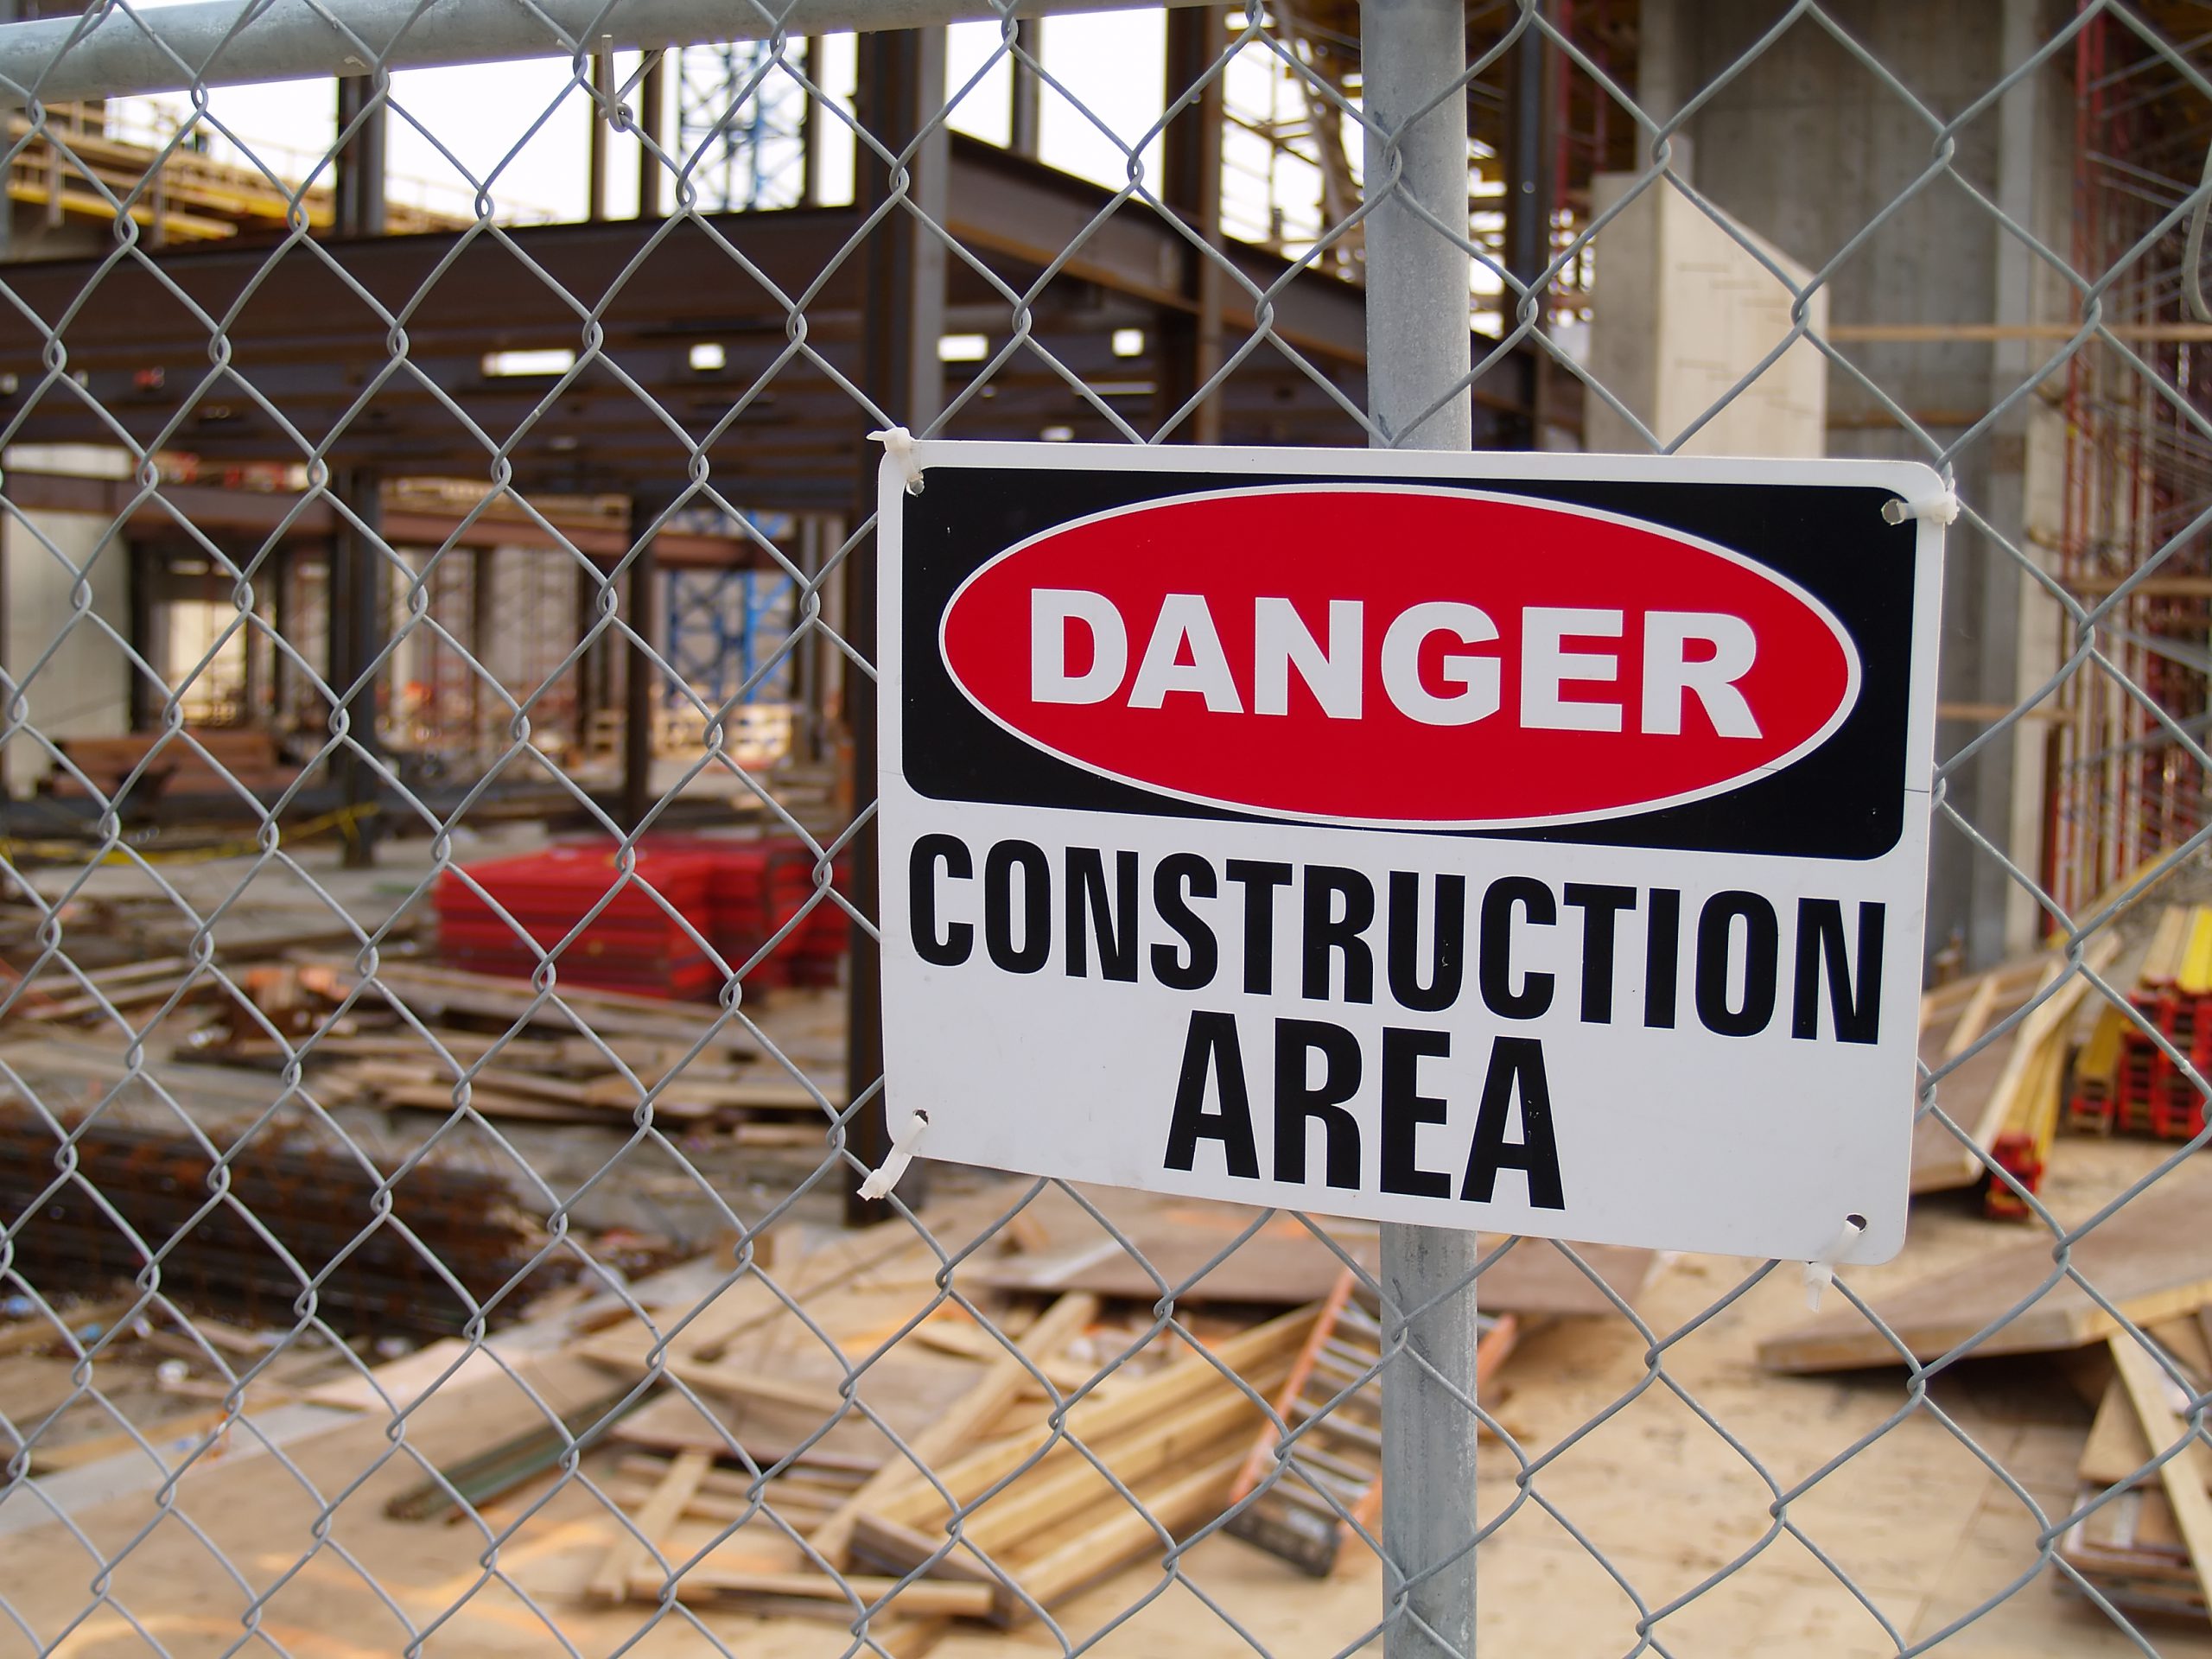 Sign informing people of the danger in the construction area